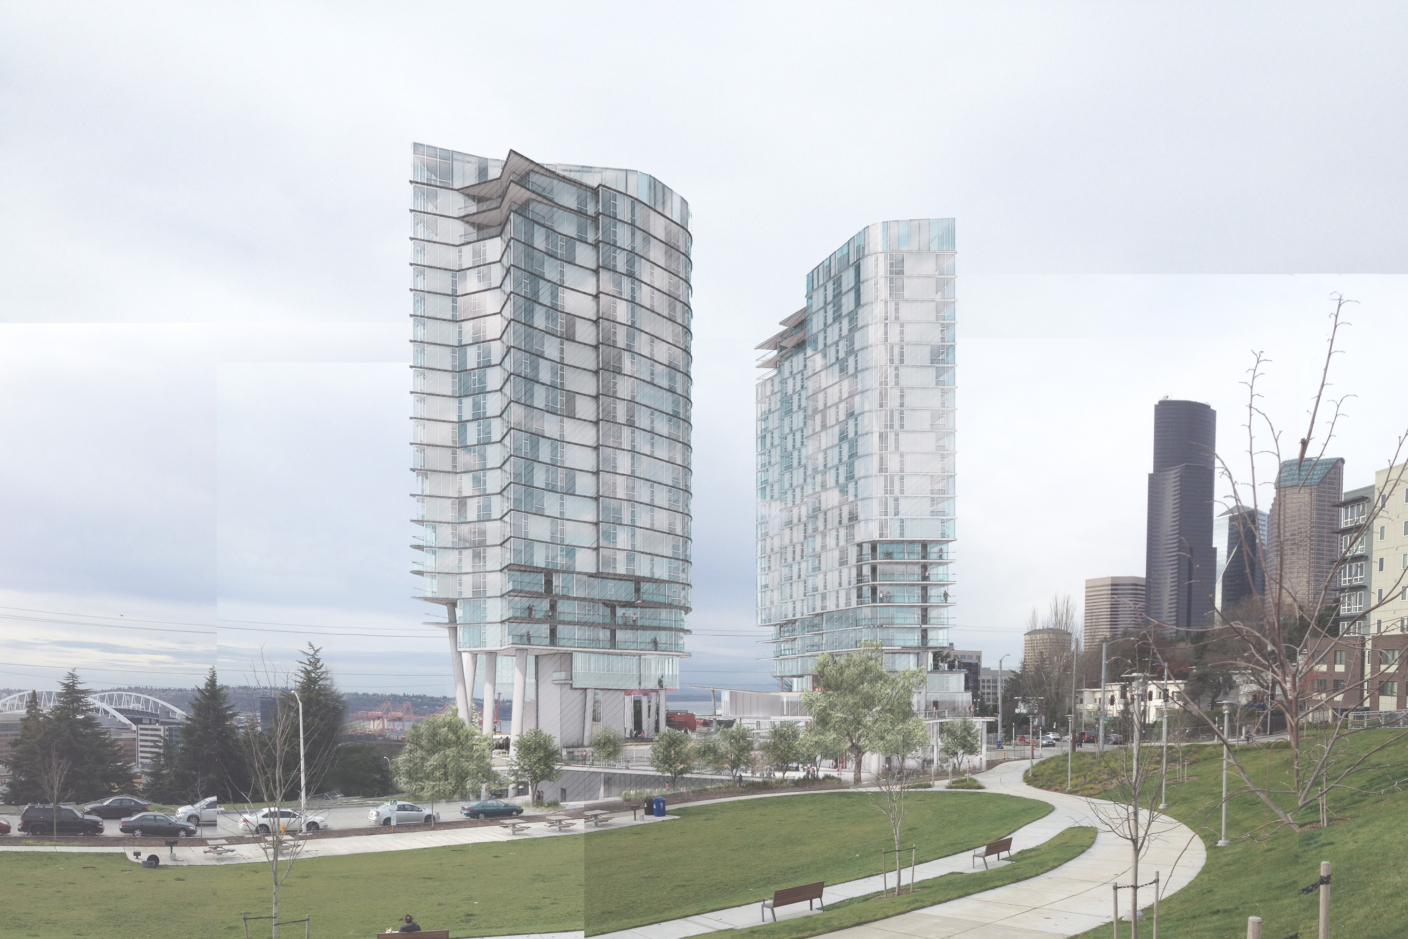 Join the Young Architects Forum for a construction tour of the Yesler Towers.